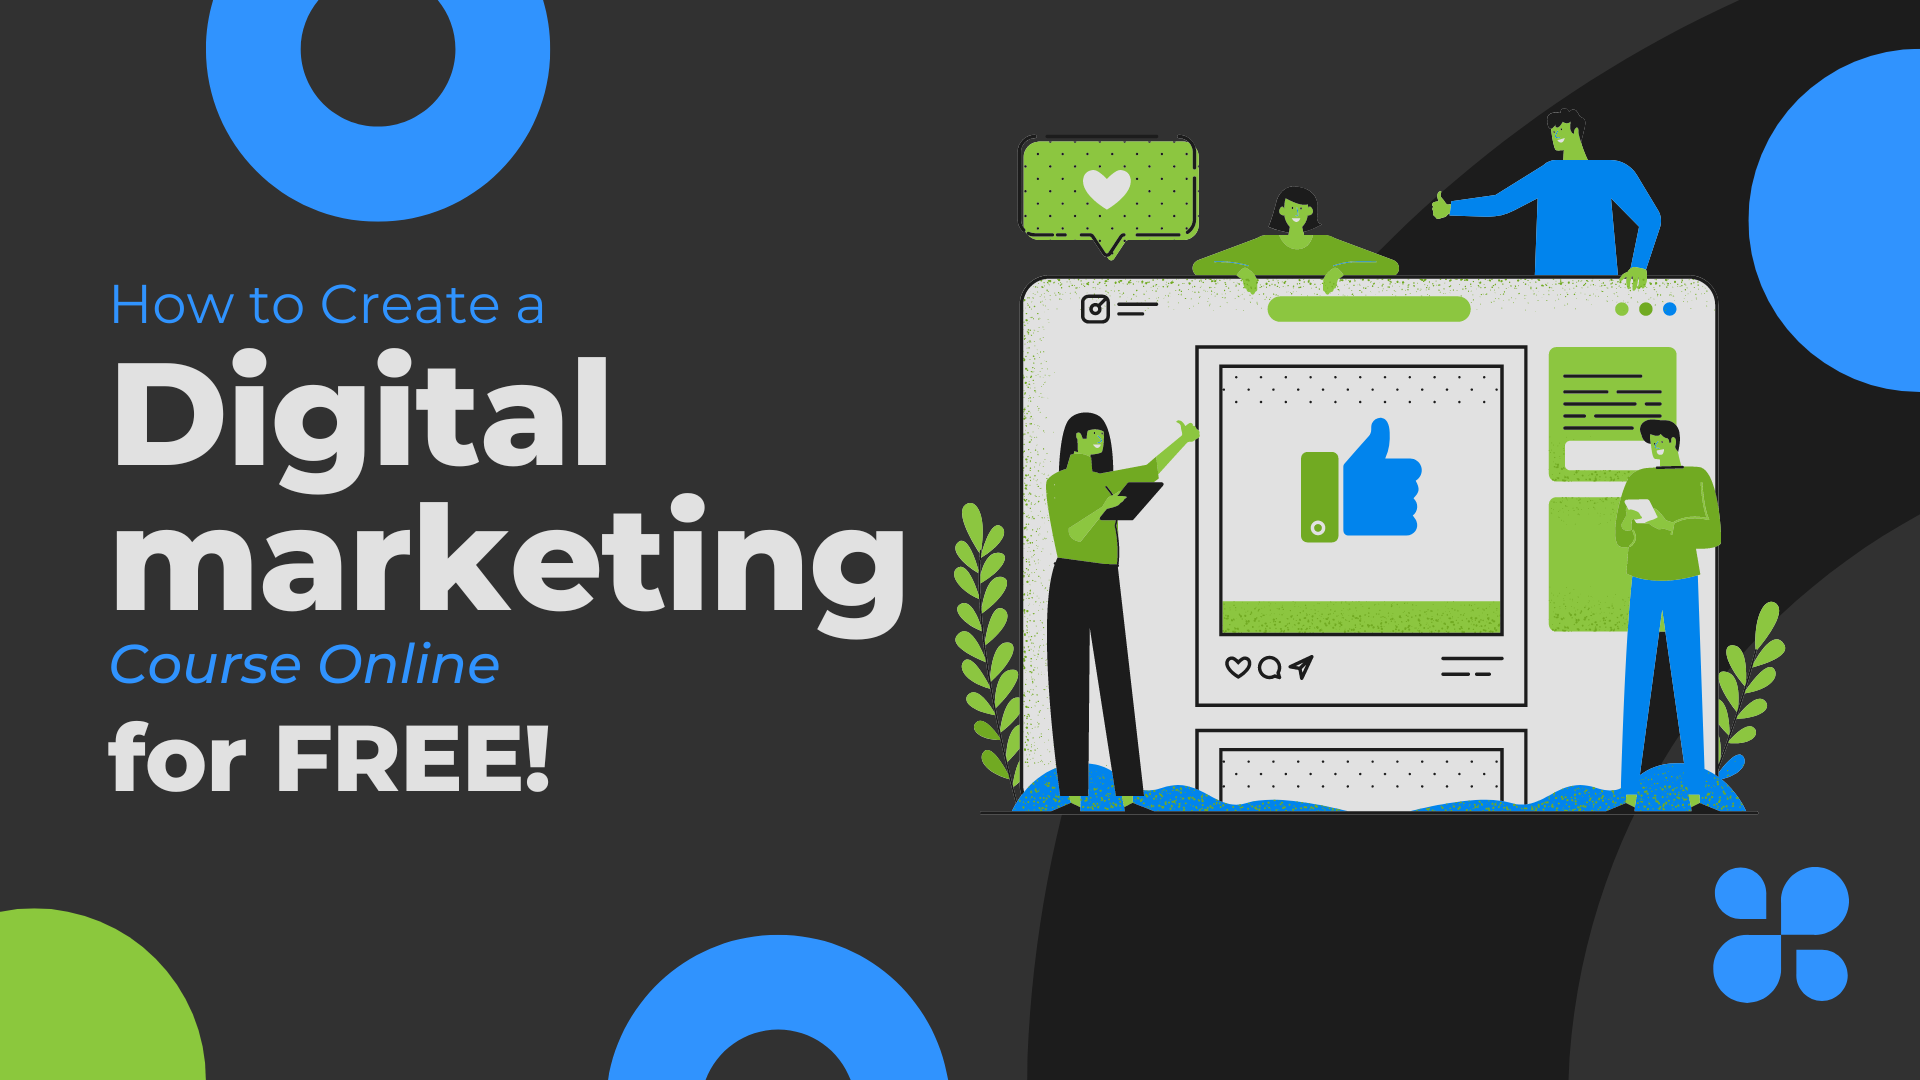 Digital Marketing Course Online: How to Create One for Free